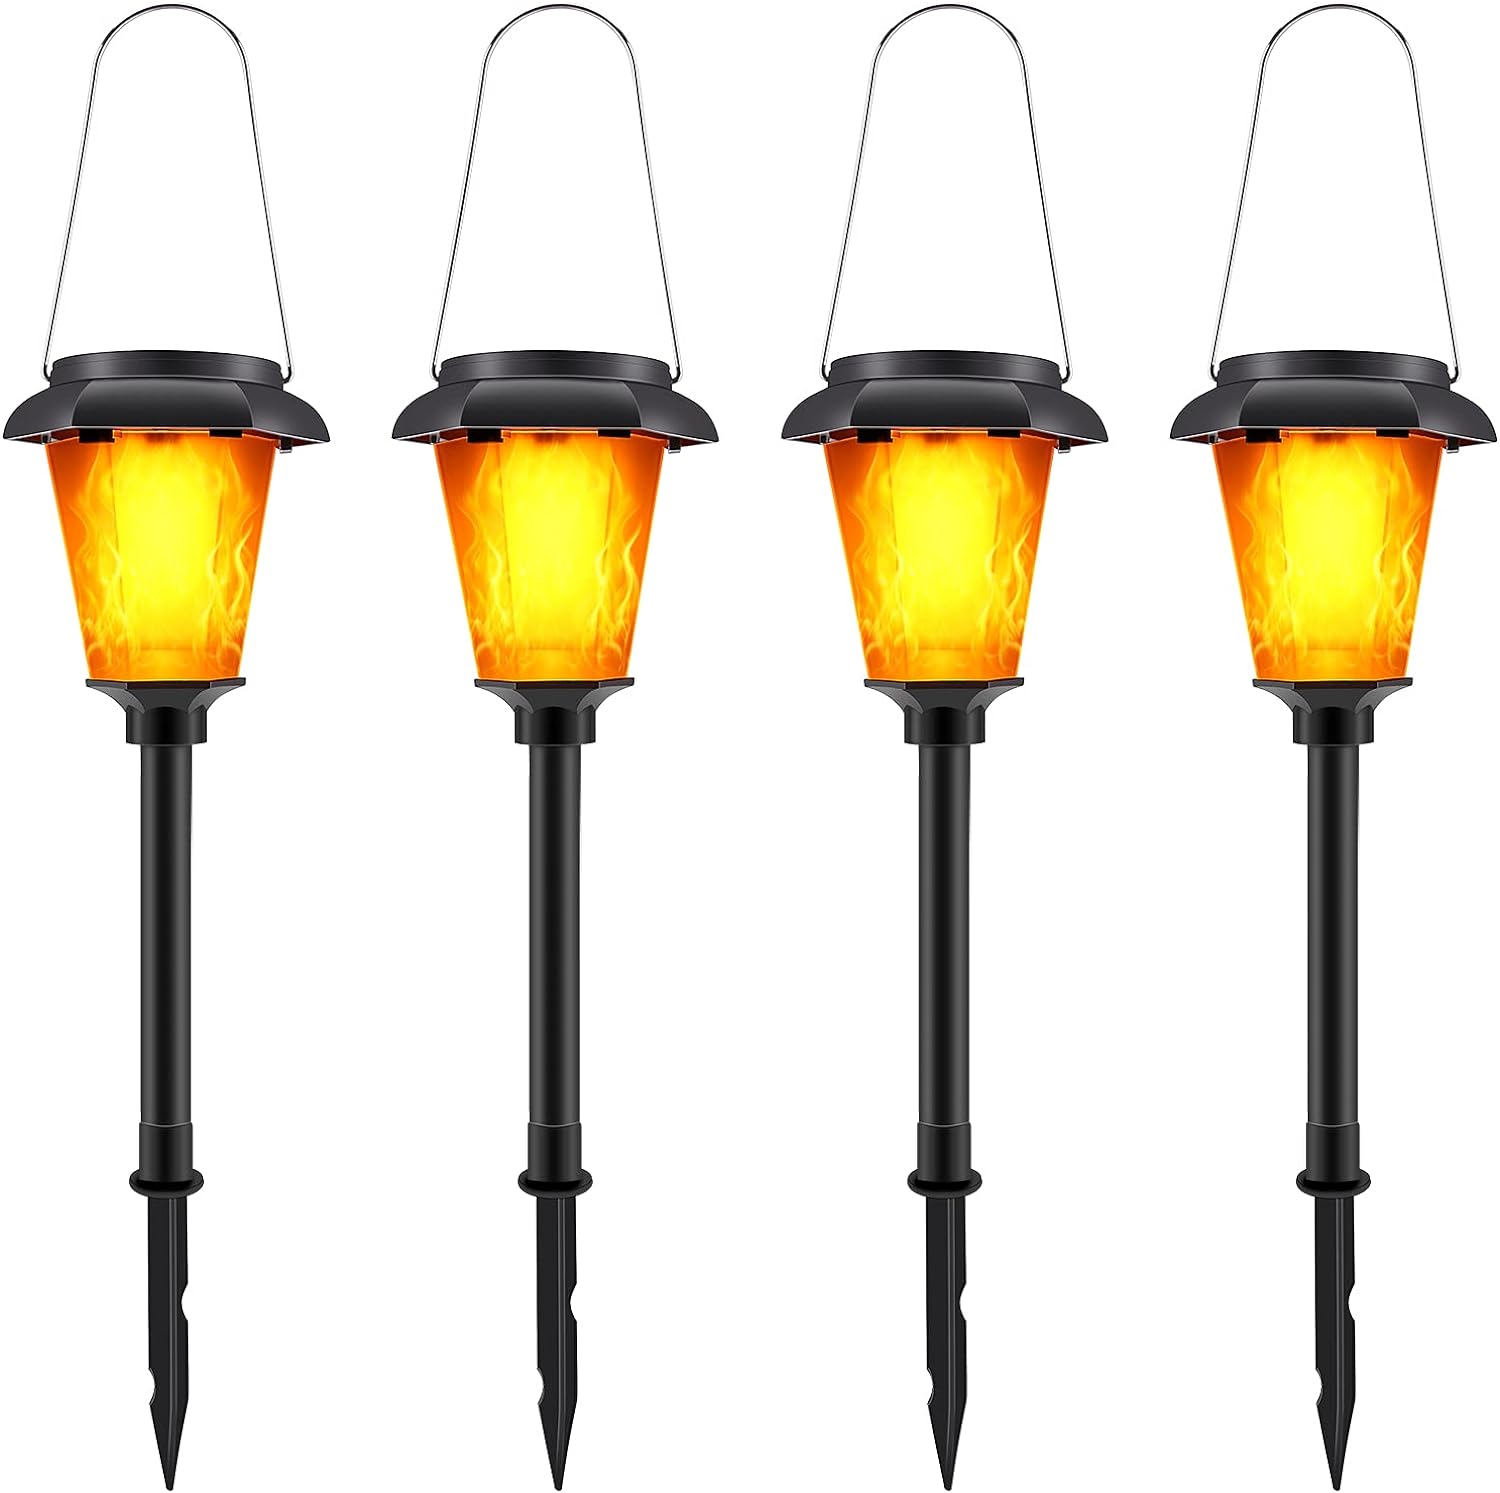 Flickering Flame Solar Lights, IMAGE 4 Pcs Solar Torch Light with